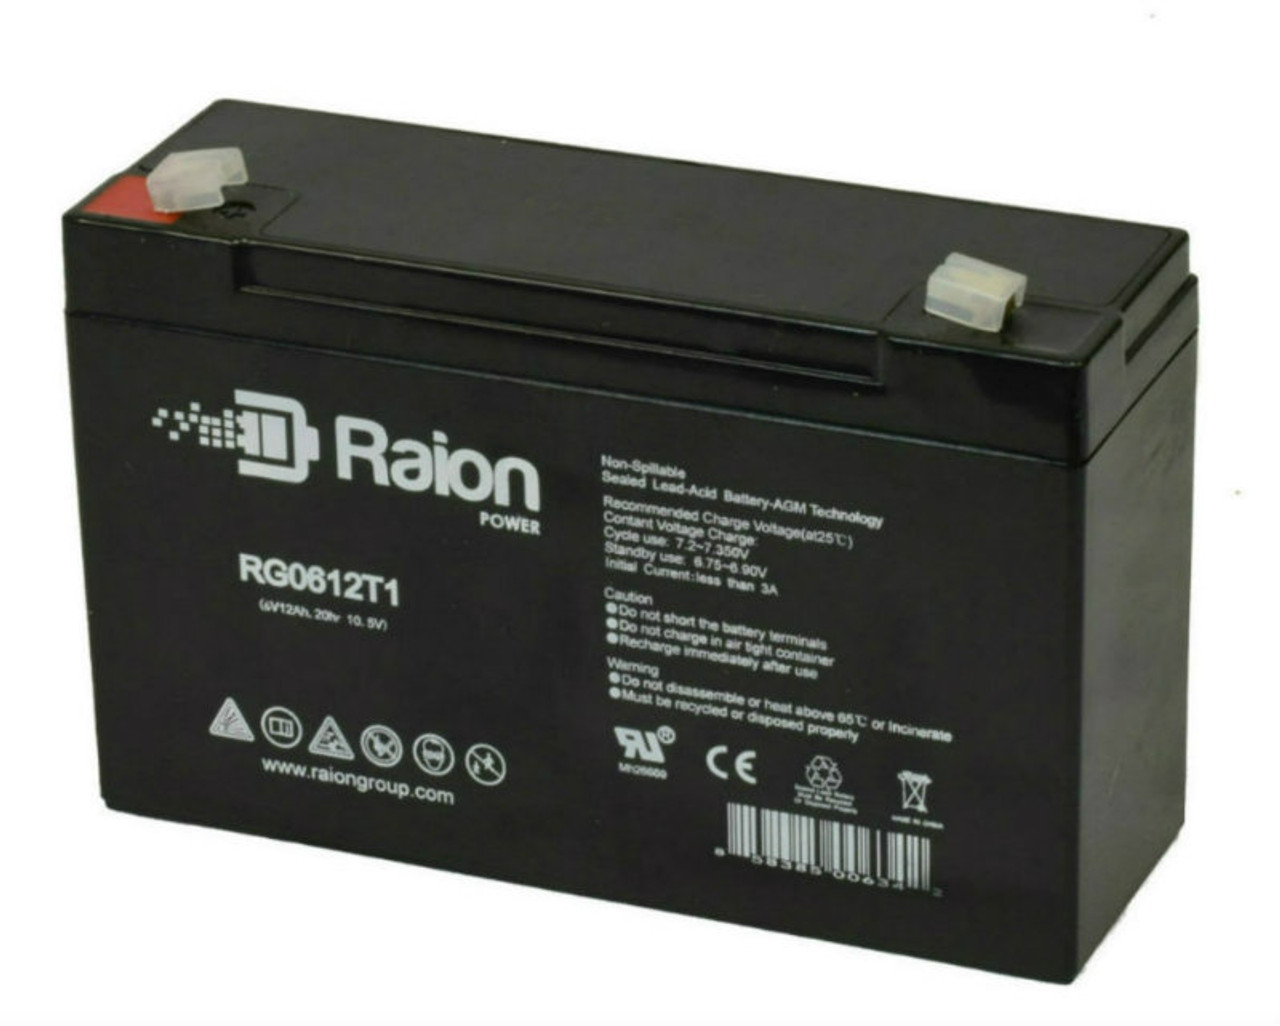 Raion Power RG06120T1 6V 12Ah Replacement UPS Battery Cartridge for ONEAC ONe200A-SB (Double Battery Model)